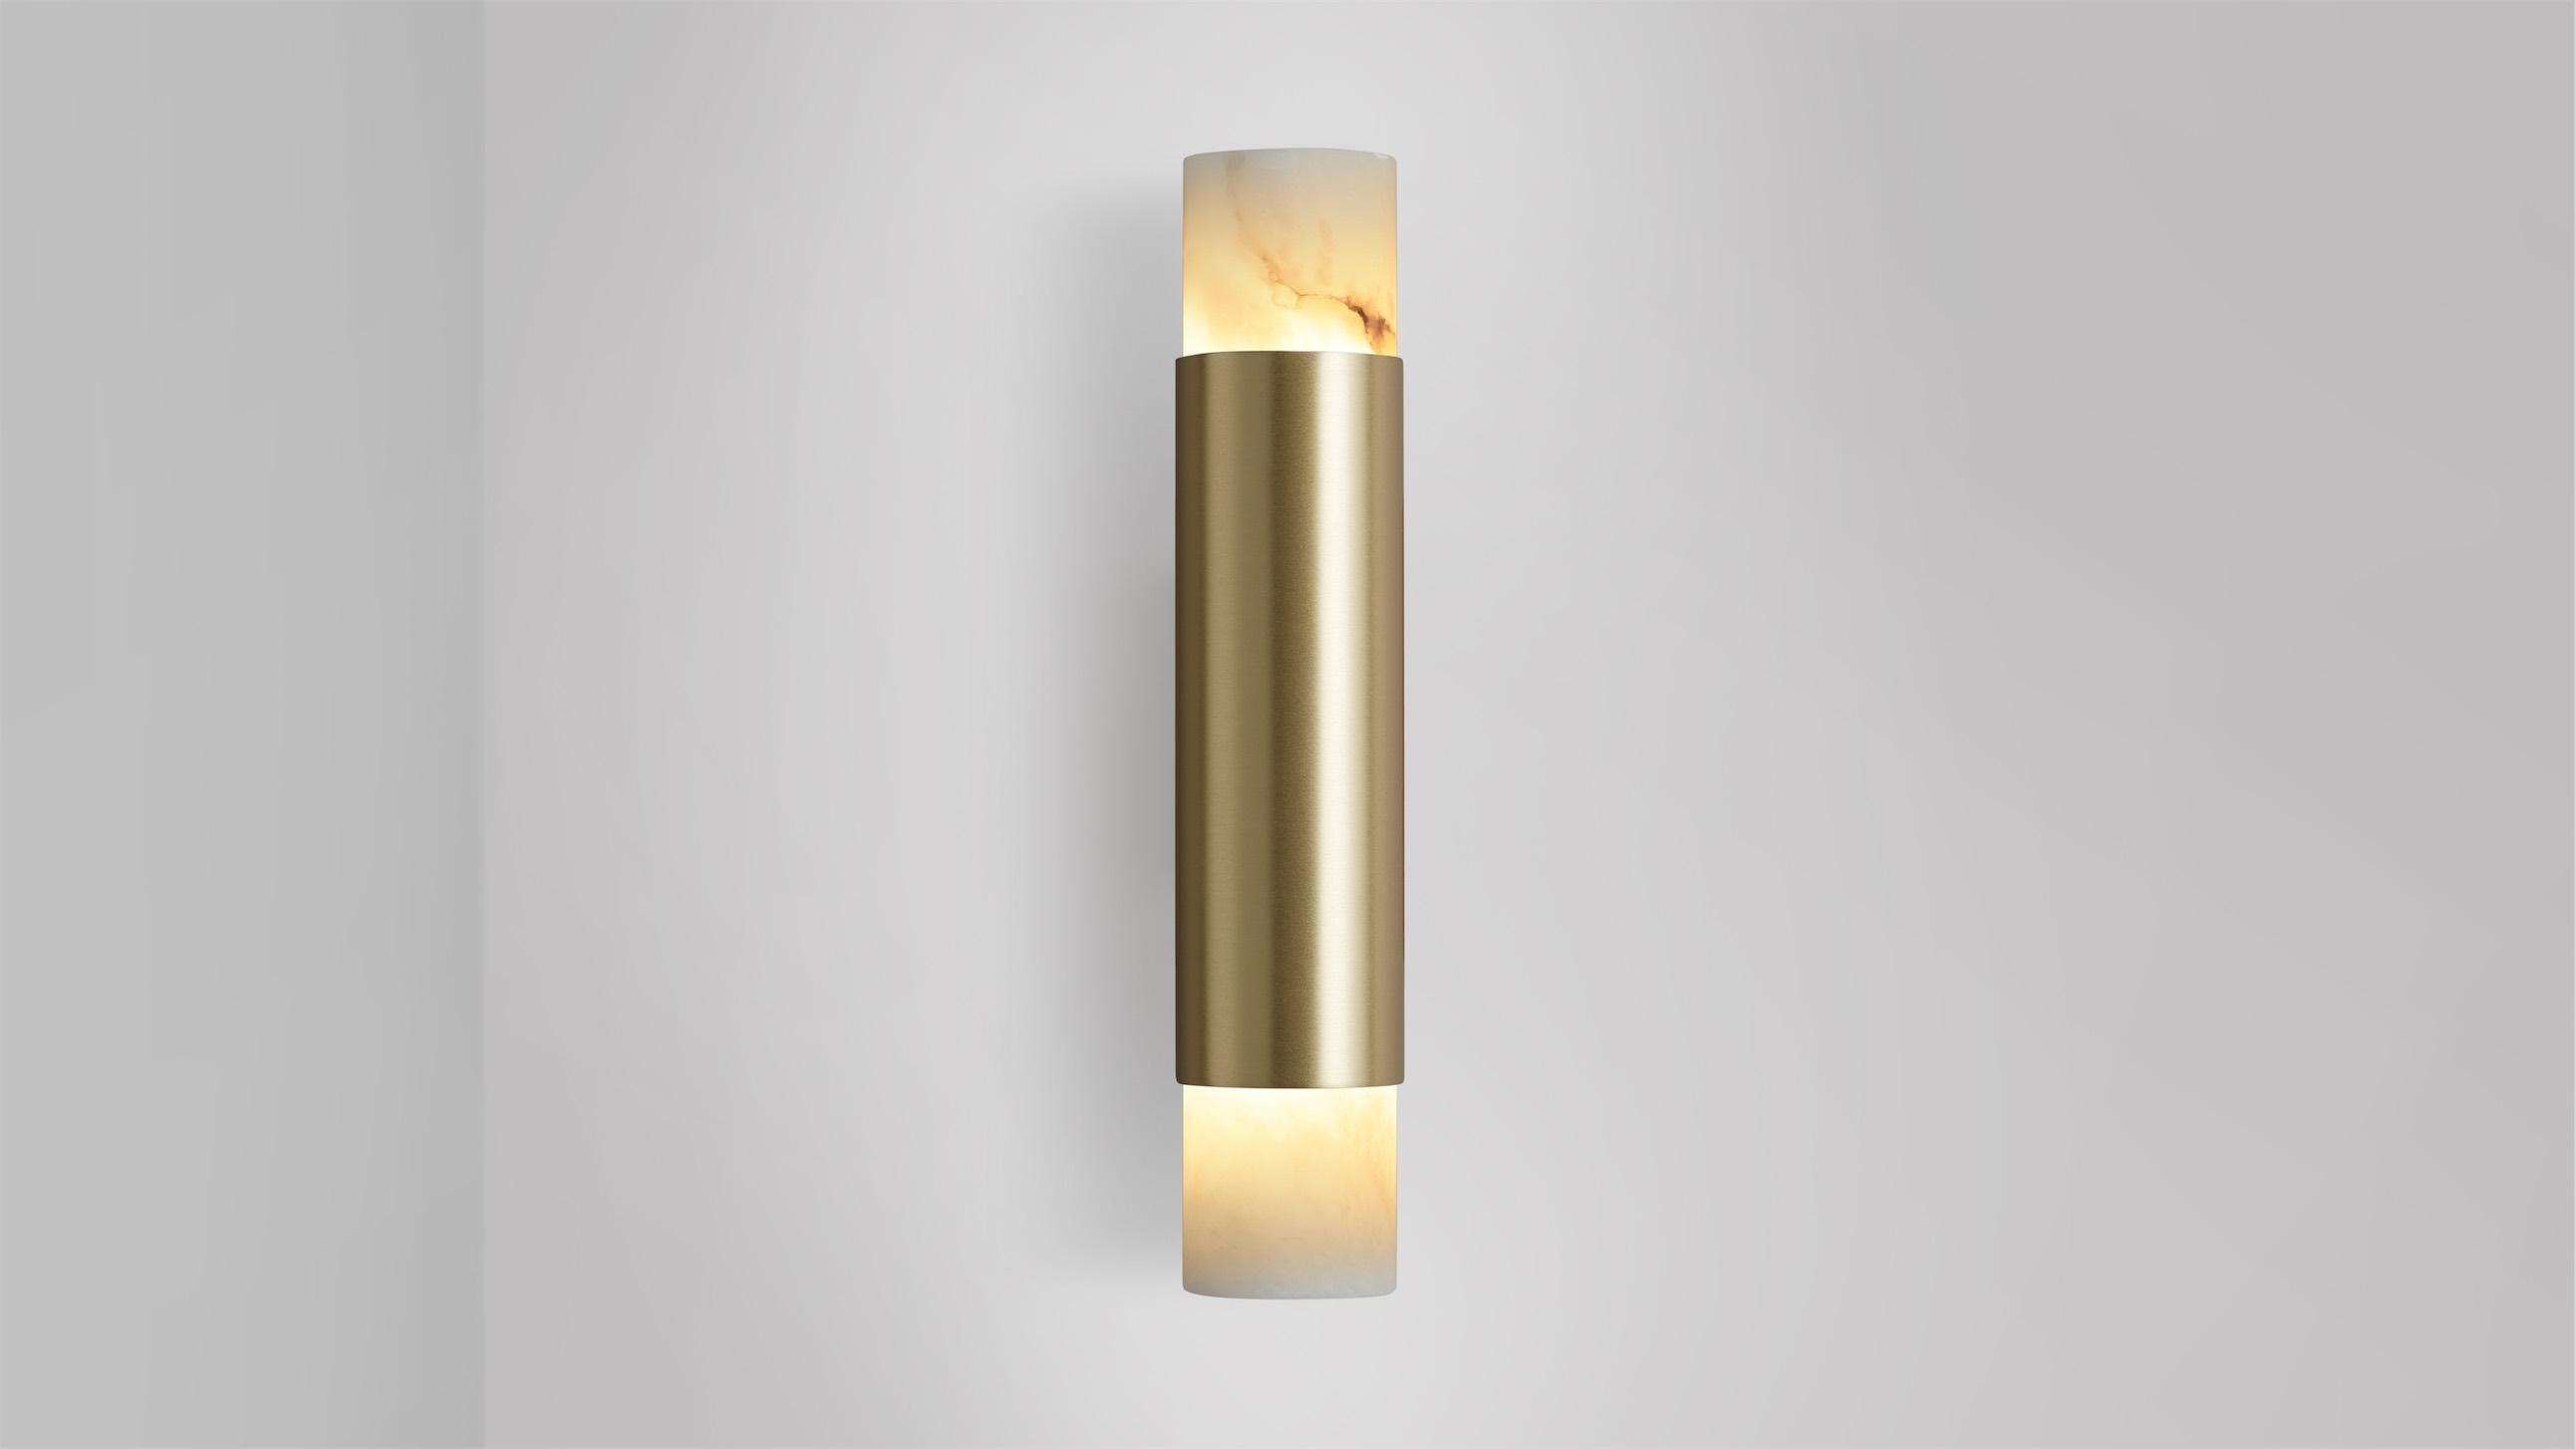 Tall Roma wall lamp by CTO Lighting
Materials: satin brass, alabaster.
Dimensions: D 8.5 x W 5.5 x H 28 cm
Available in satin brass and bronze.

Celebrating the simplicity of line and form, The Roma collection is designed to highlight the noble